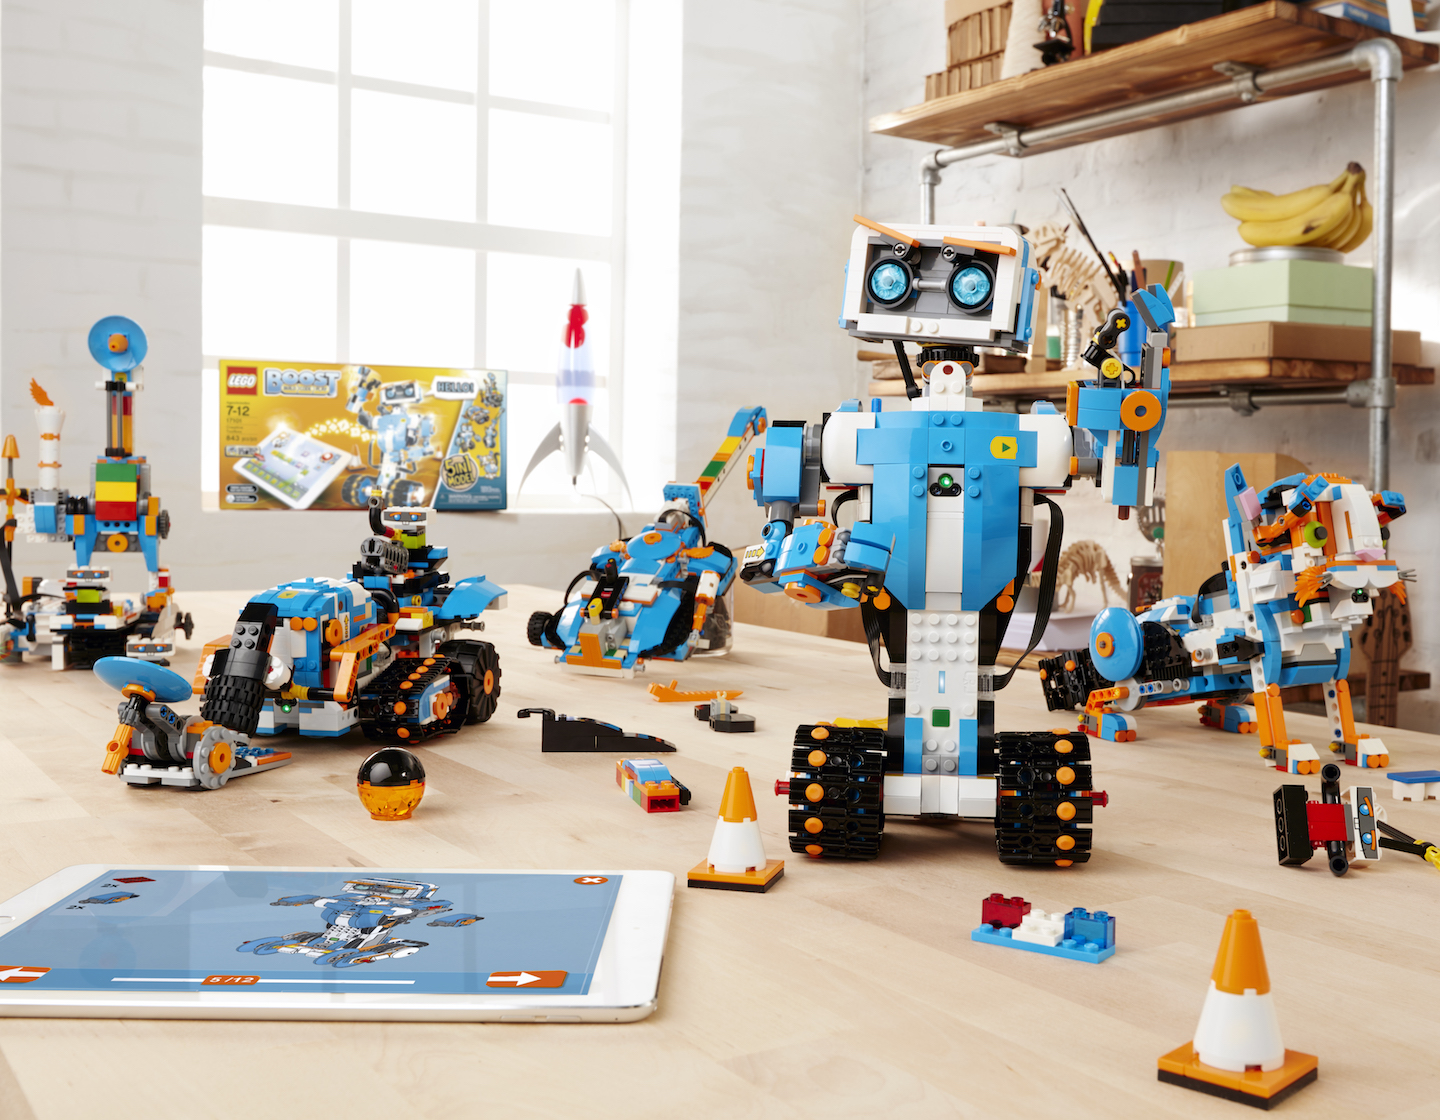 Lego Boost Review: The Best Robot Kit for Kids